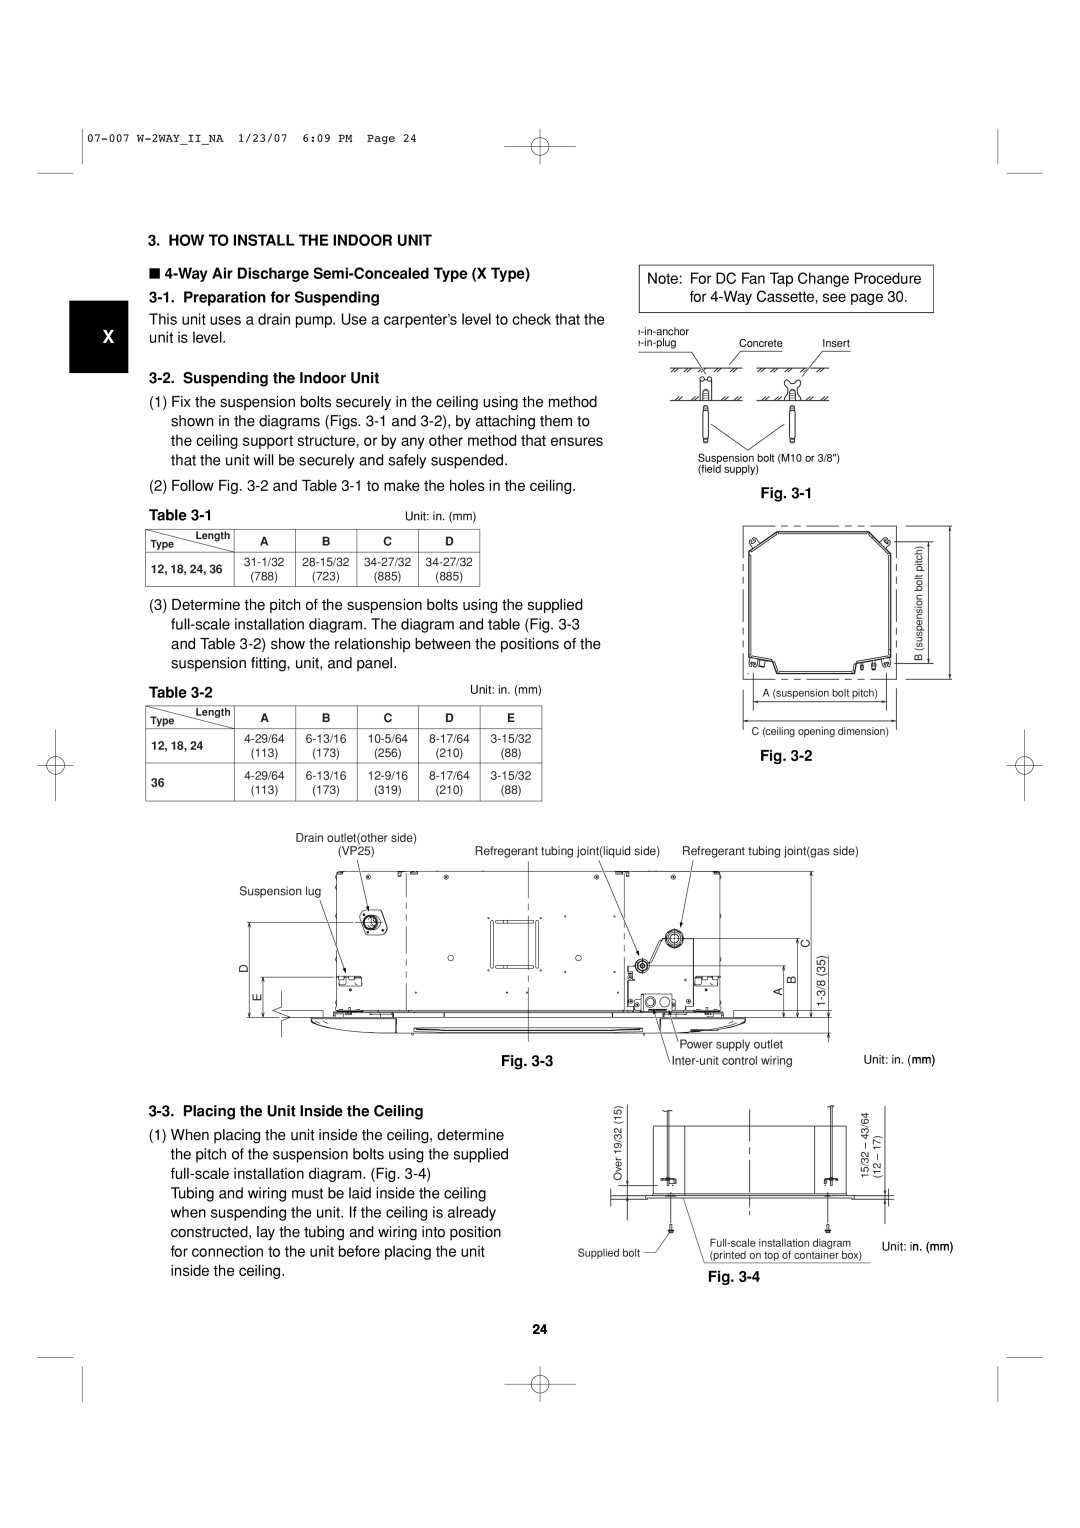 Sanyo 85464359982001 installation instructions How To Install The Indoor Unit, Suspending the Indoor Unit, Table, Fig 